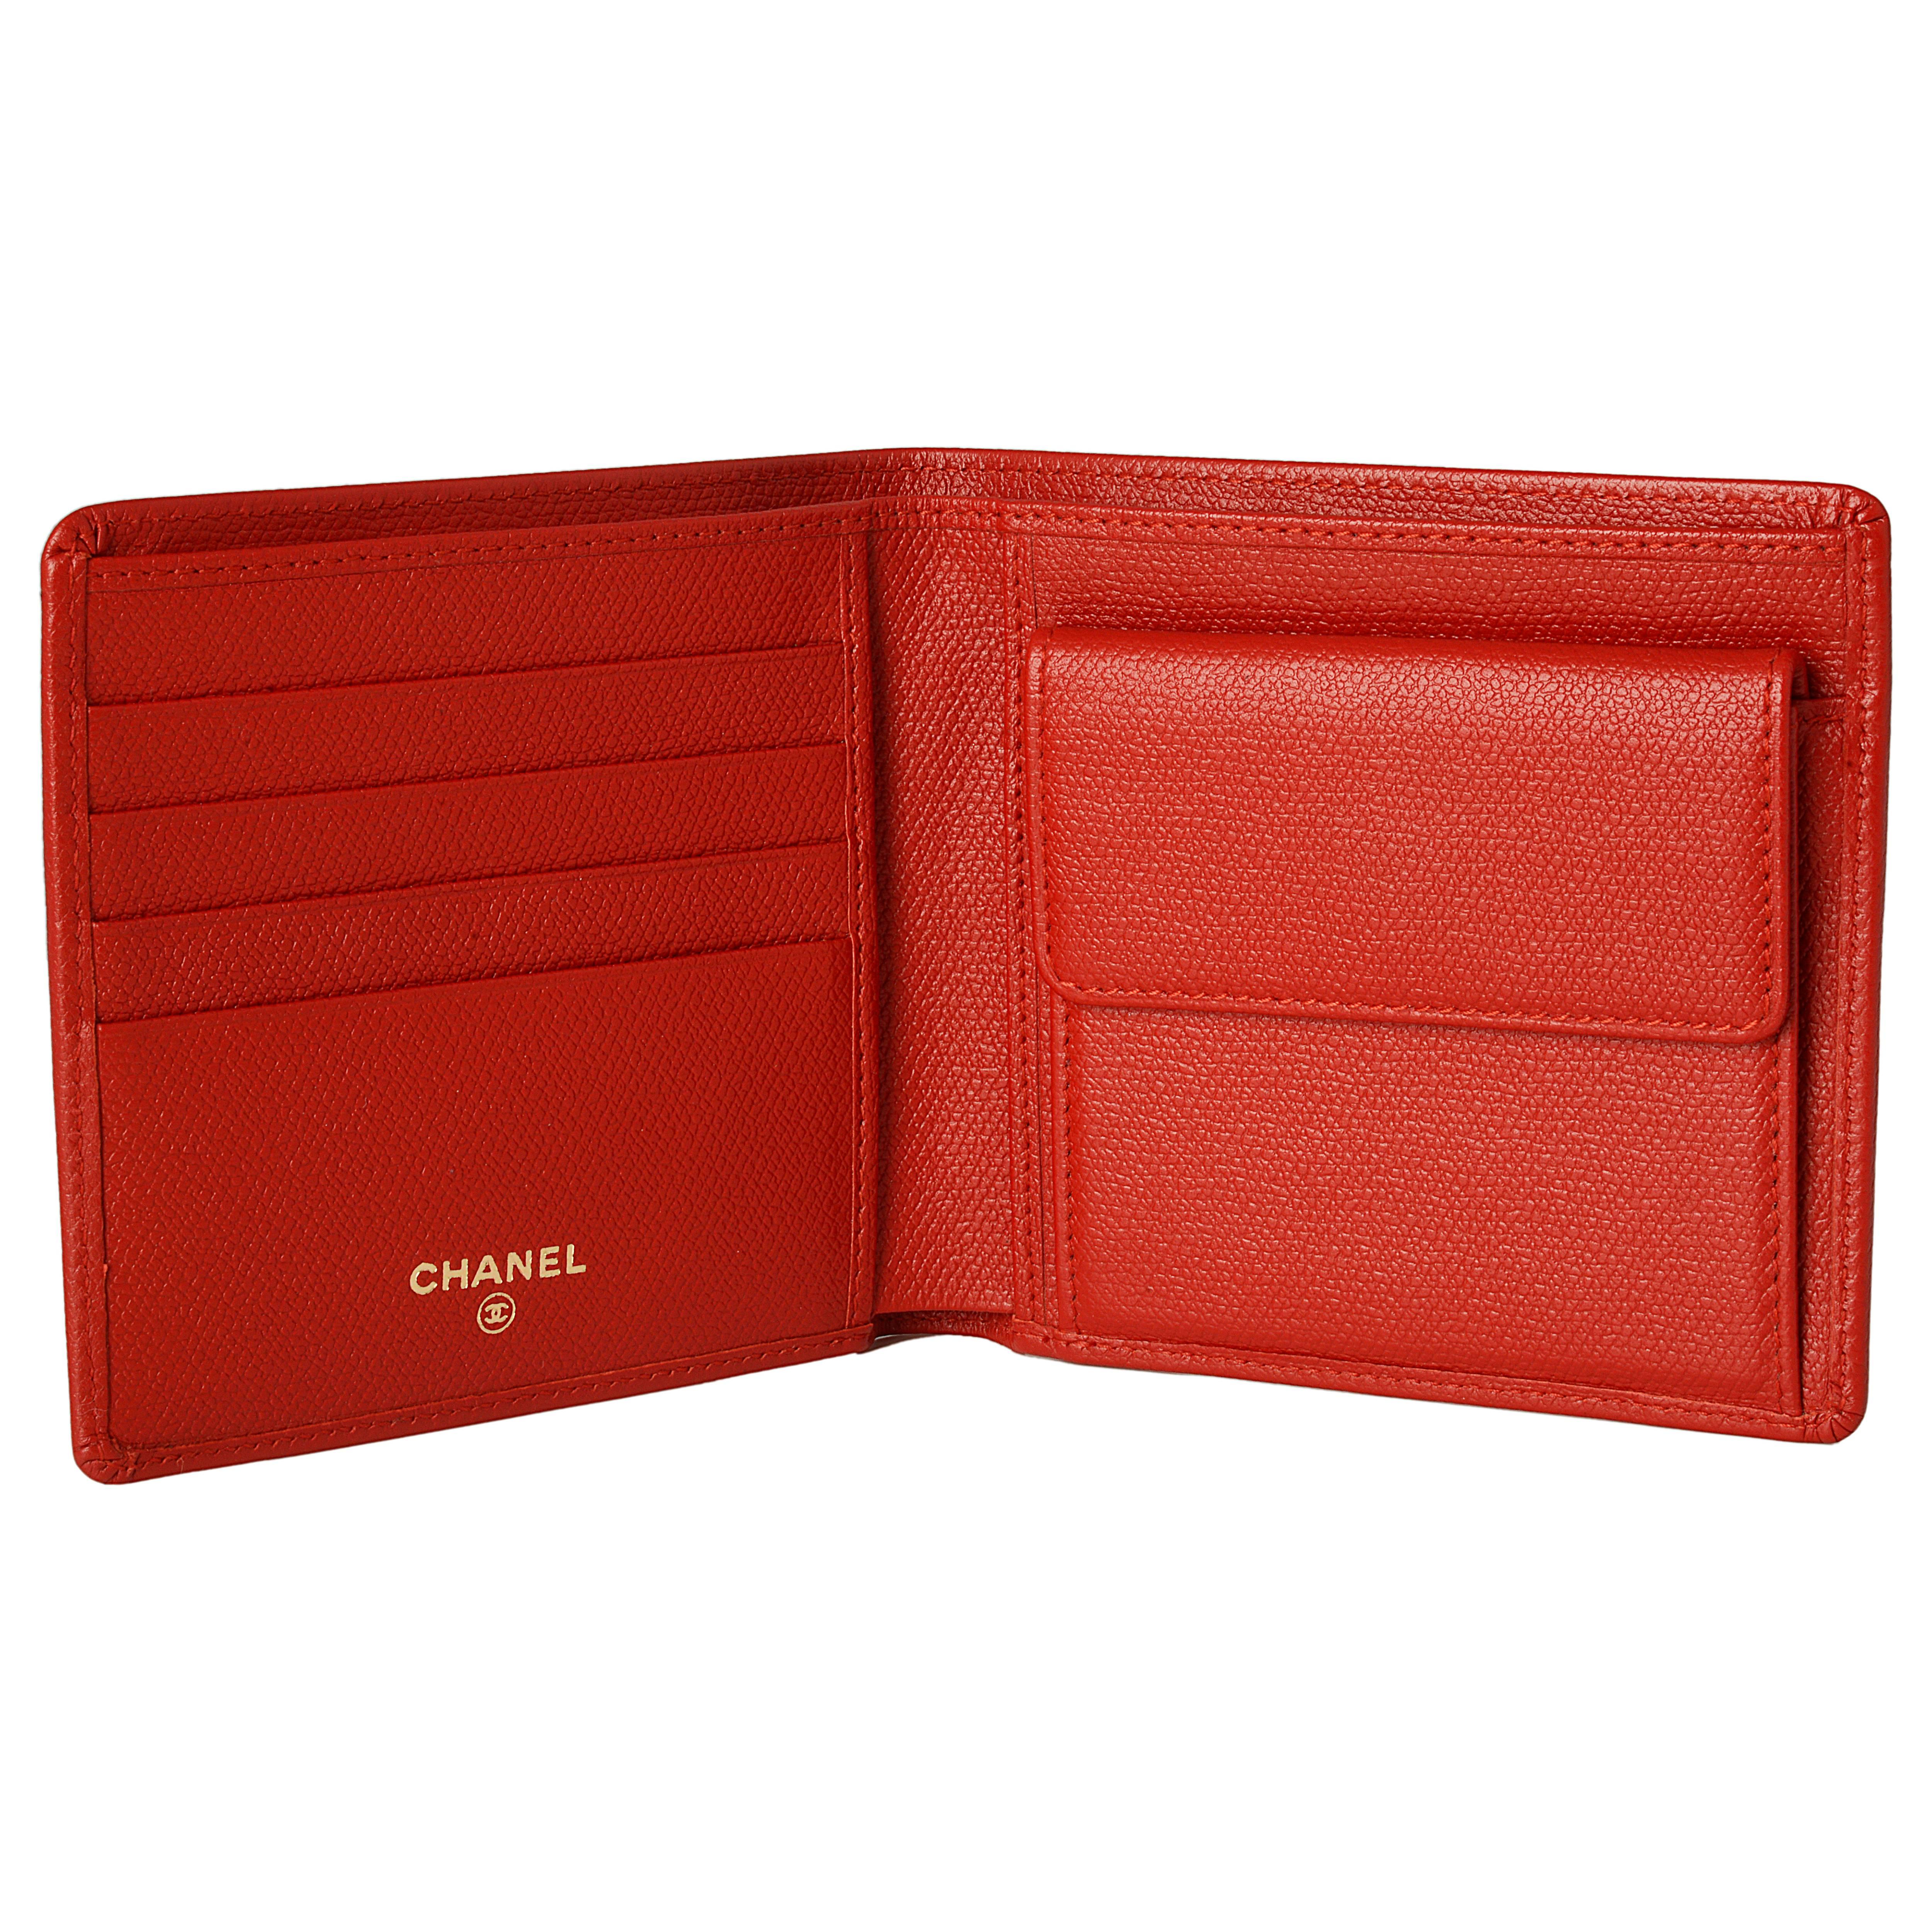 This Chanel wallet is expertly crafted from striking red leather. Featuring four card slots, a coin compartment and two main compartments this wallet is perfect for everyday use. The outside is adorned with the iconic interlocking 'C' logo in